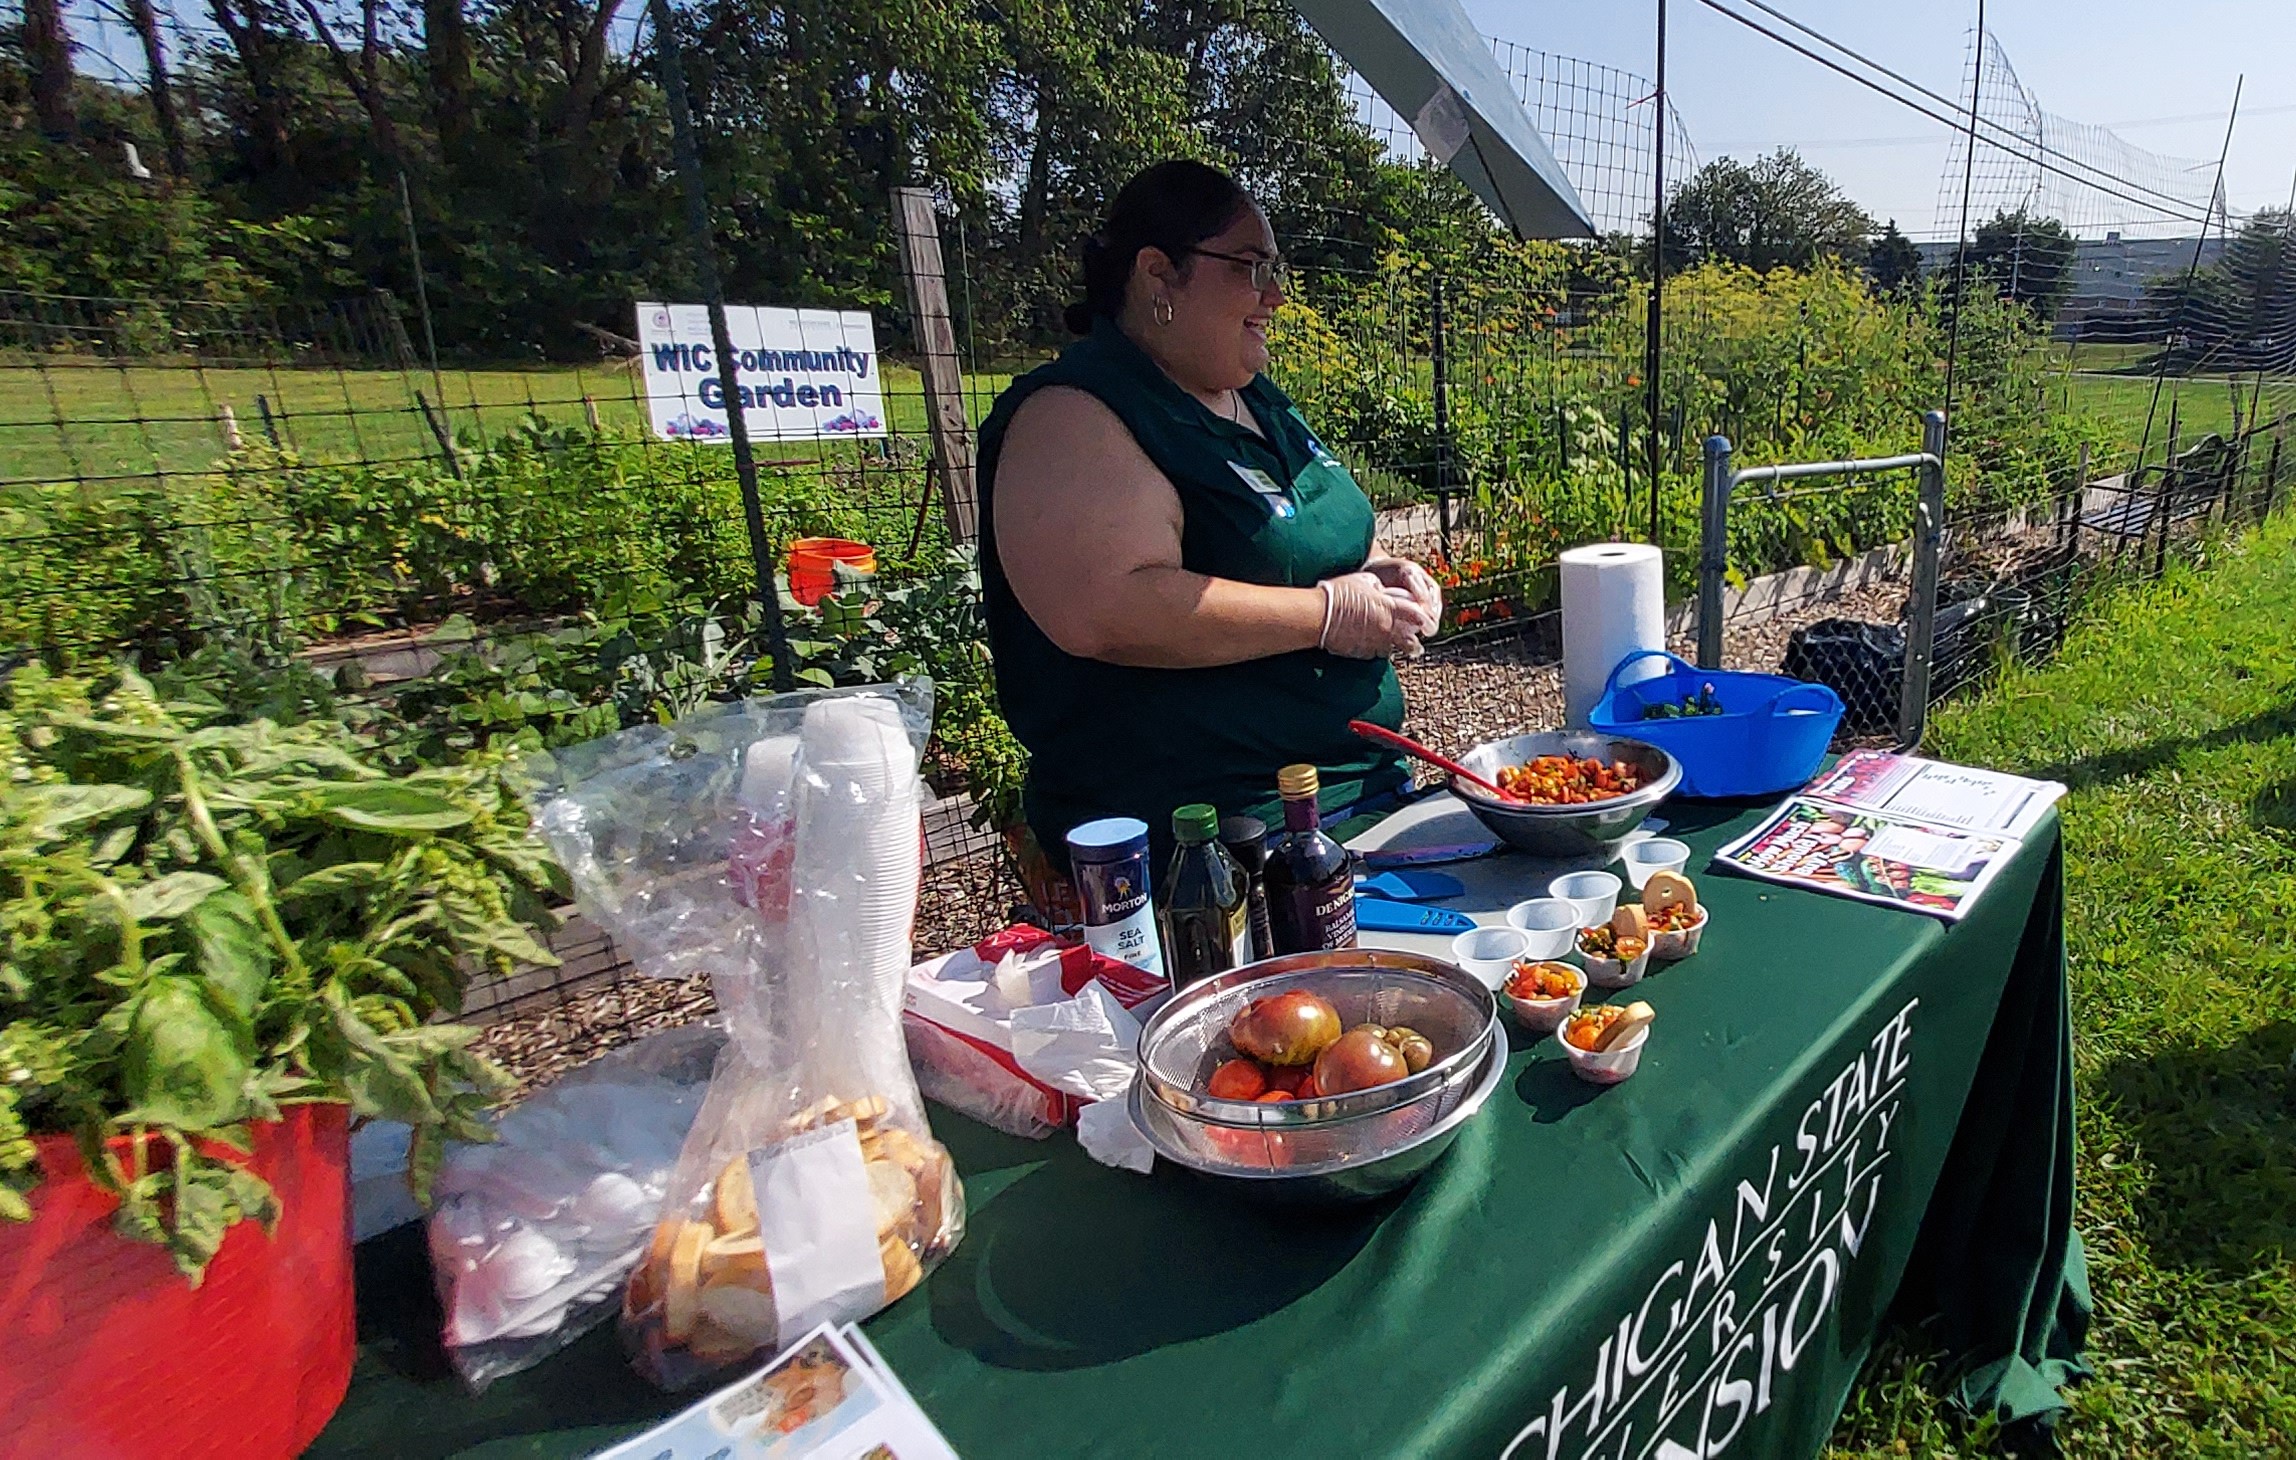 A woman stands at a table surrounded by produce and ingredients.